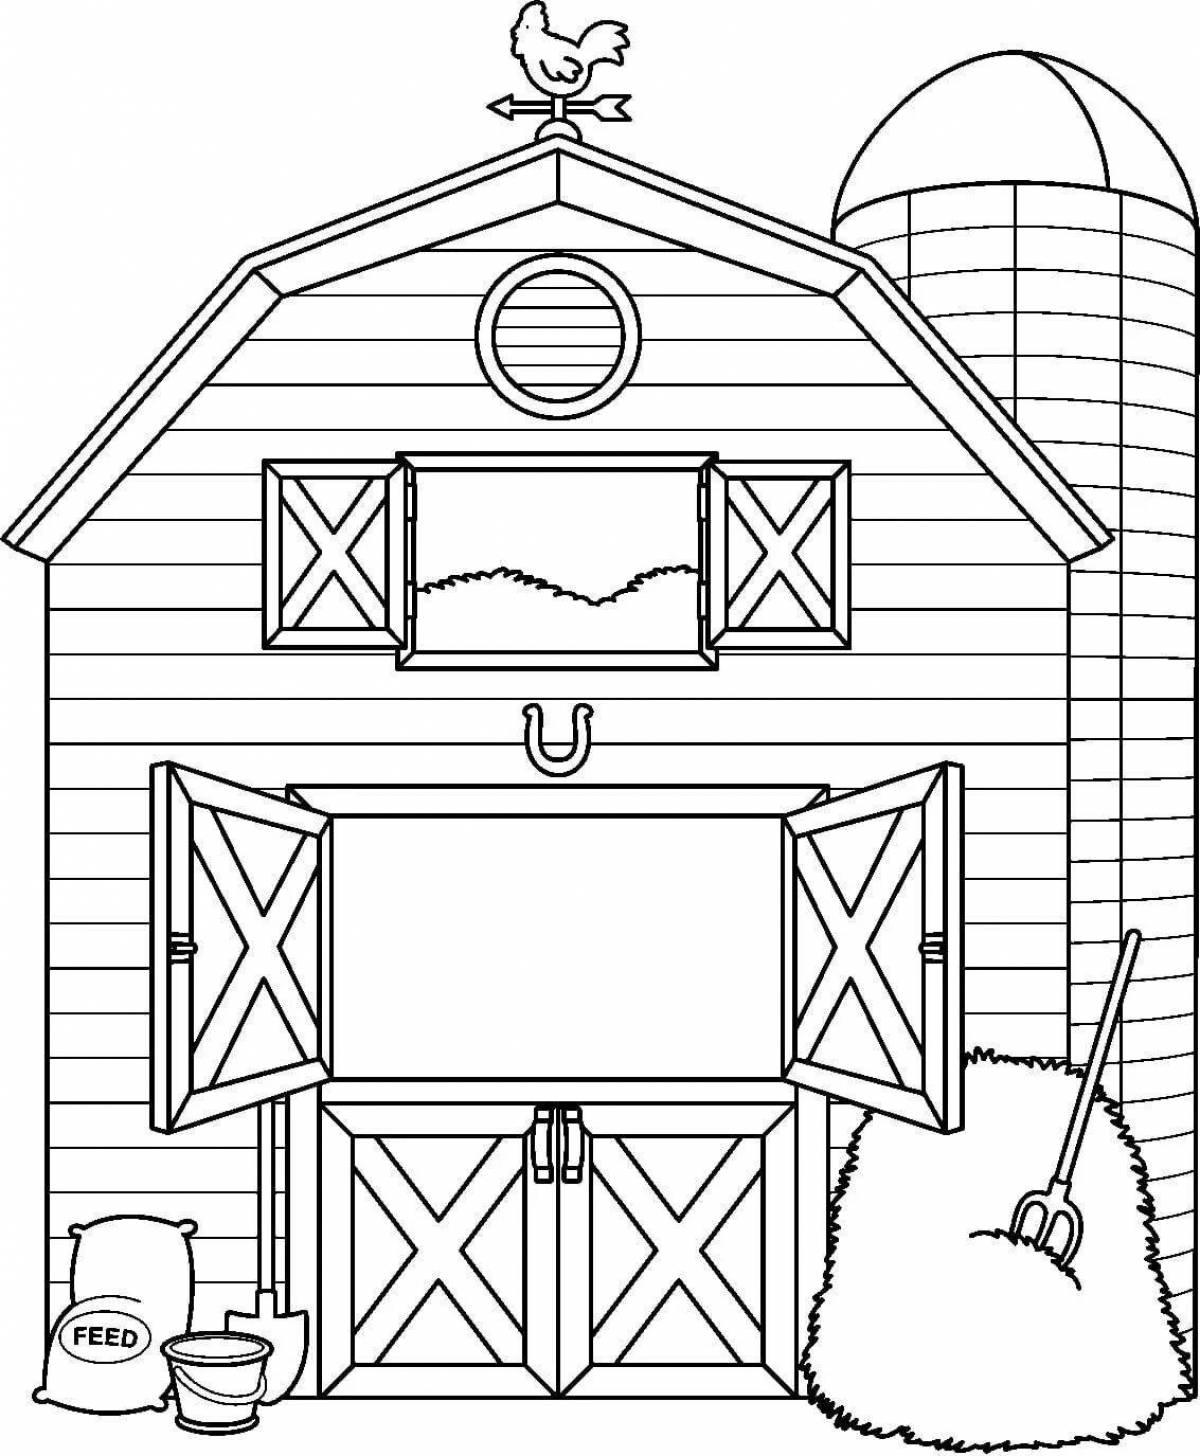 Coloring page gorgeous animal house